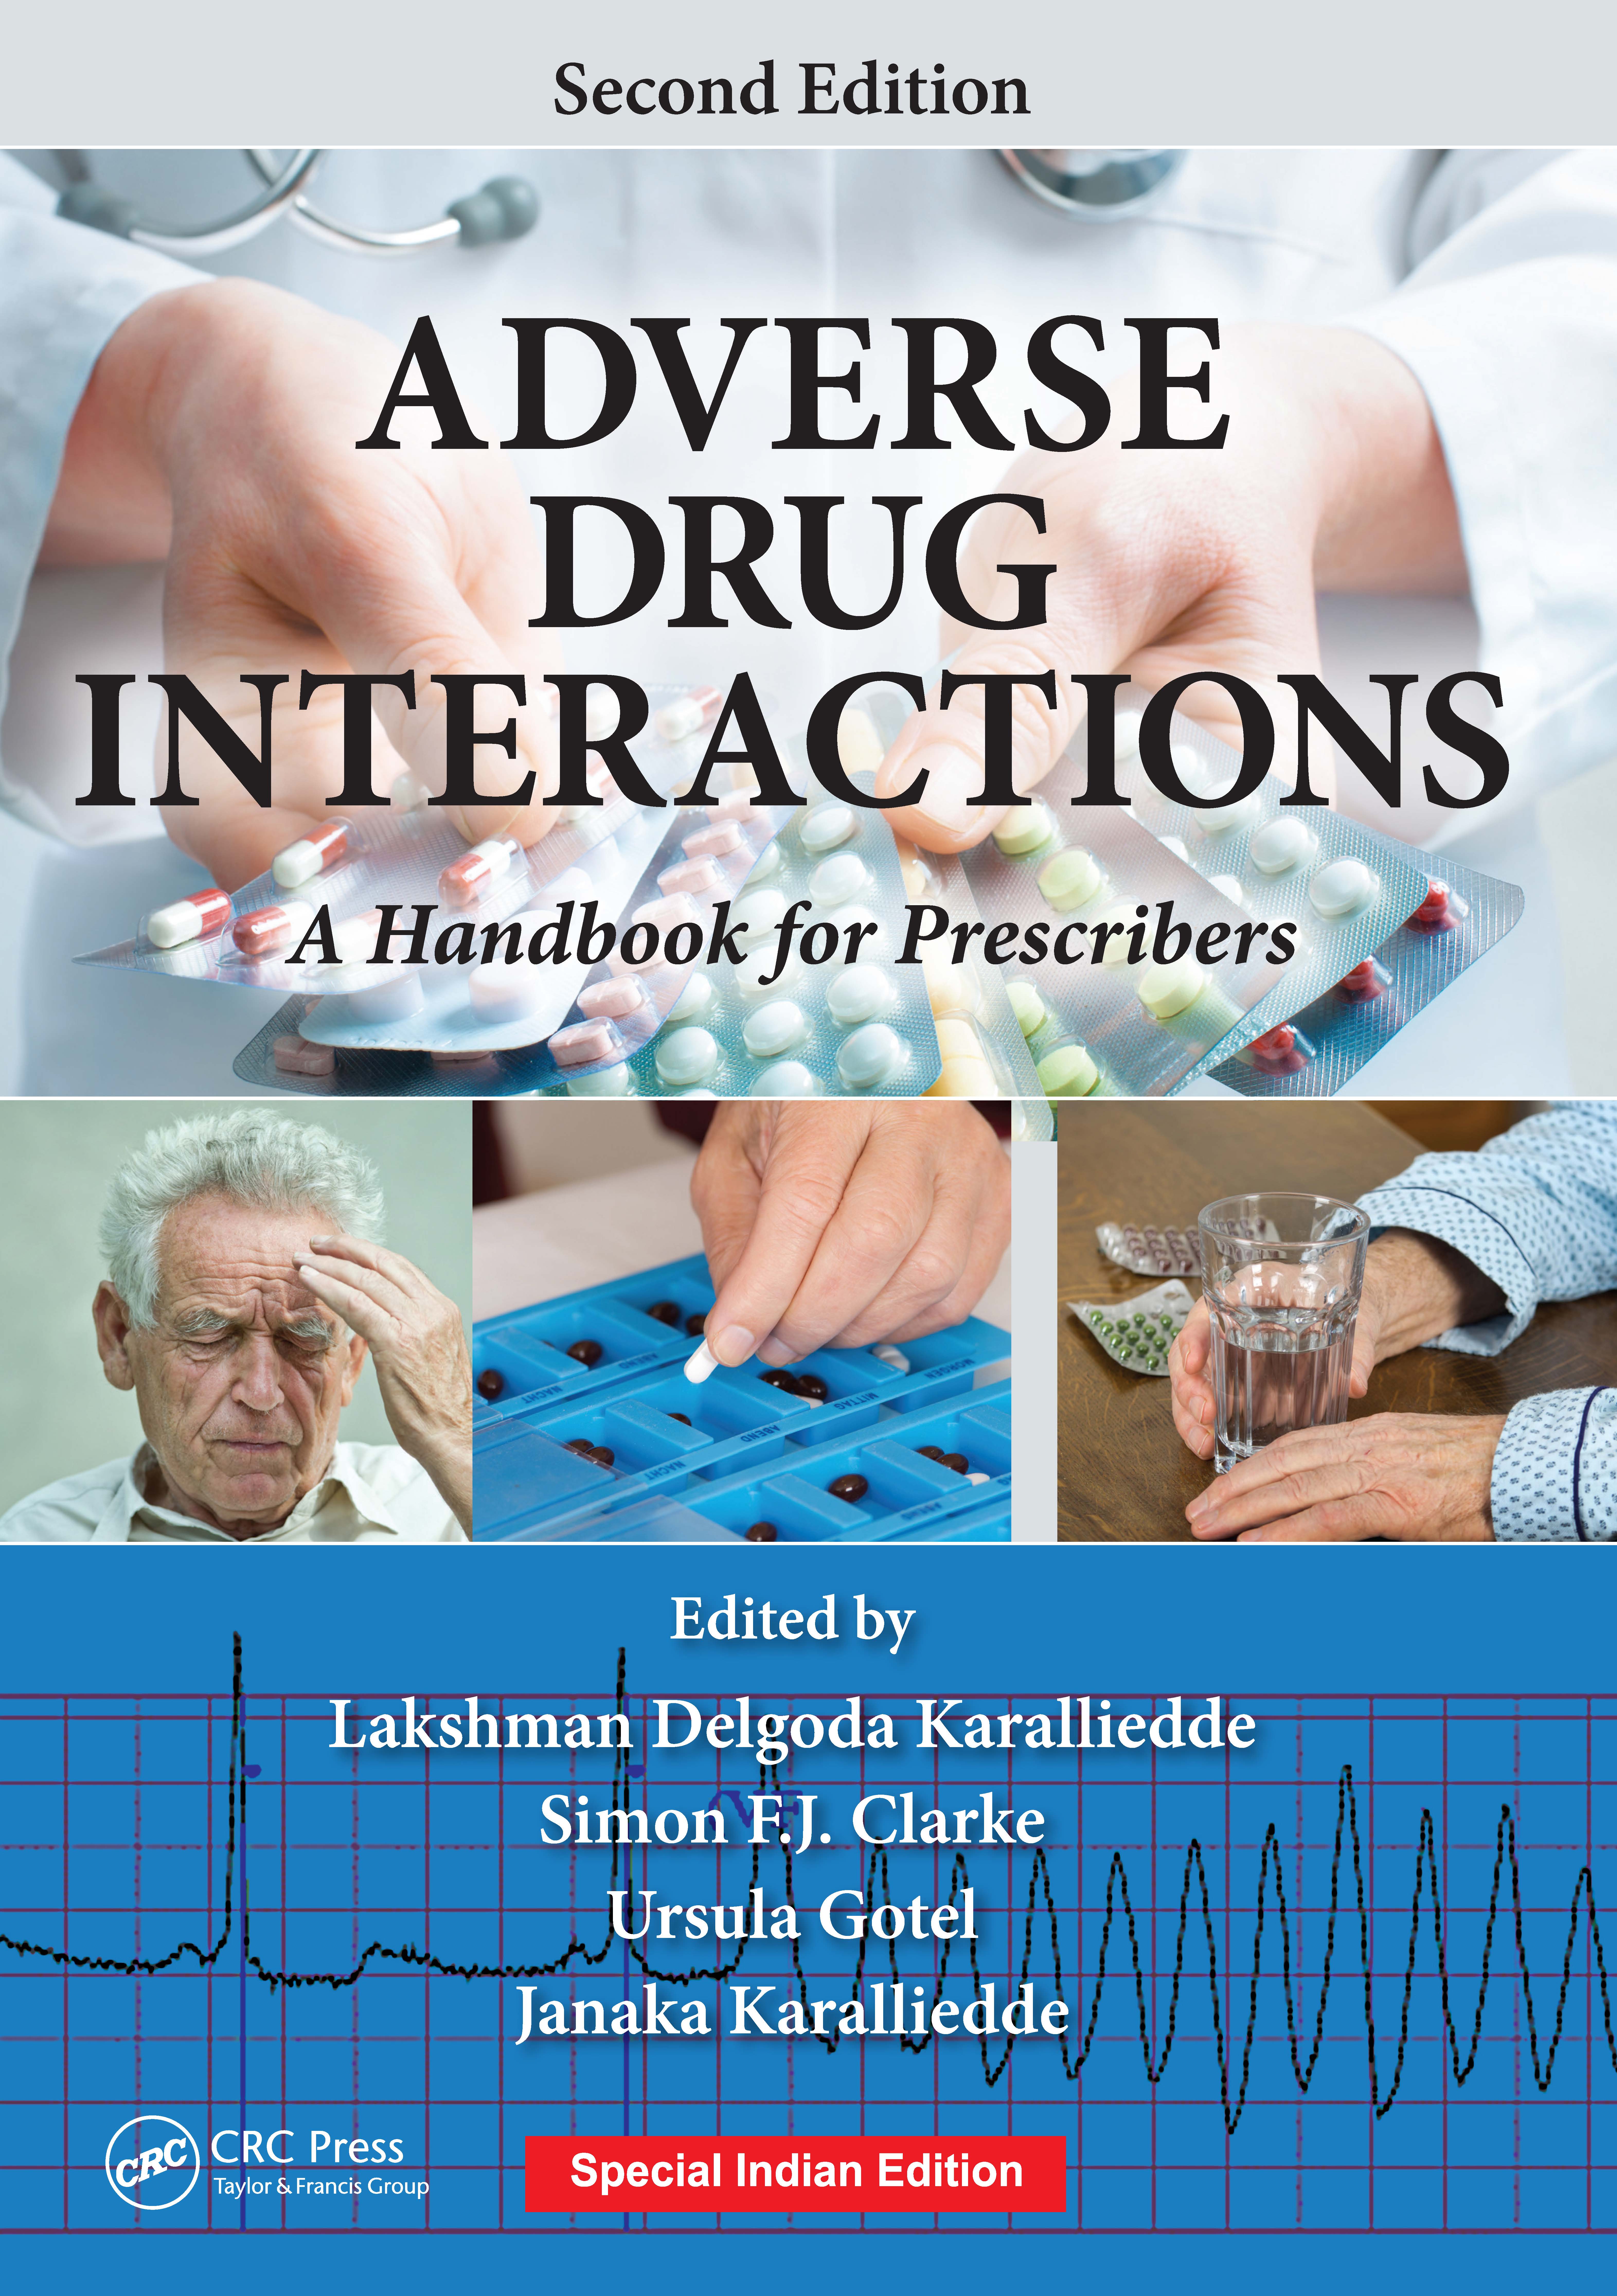 
basic-sciences/pharmacology/adverse-drug-interaction-a-handbook-for-prescribes-2-ed--9780367222192